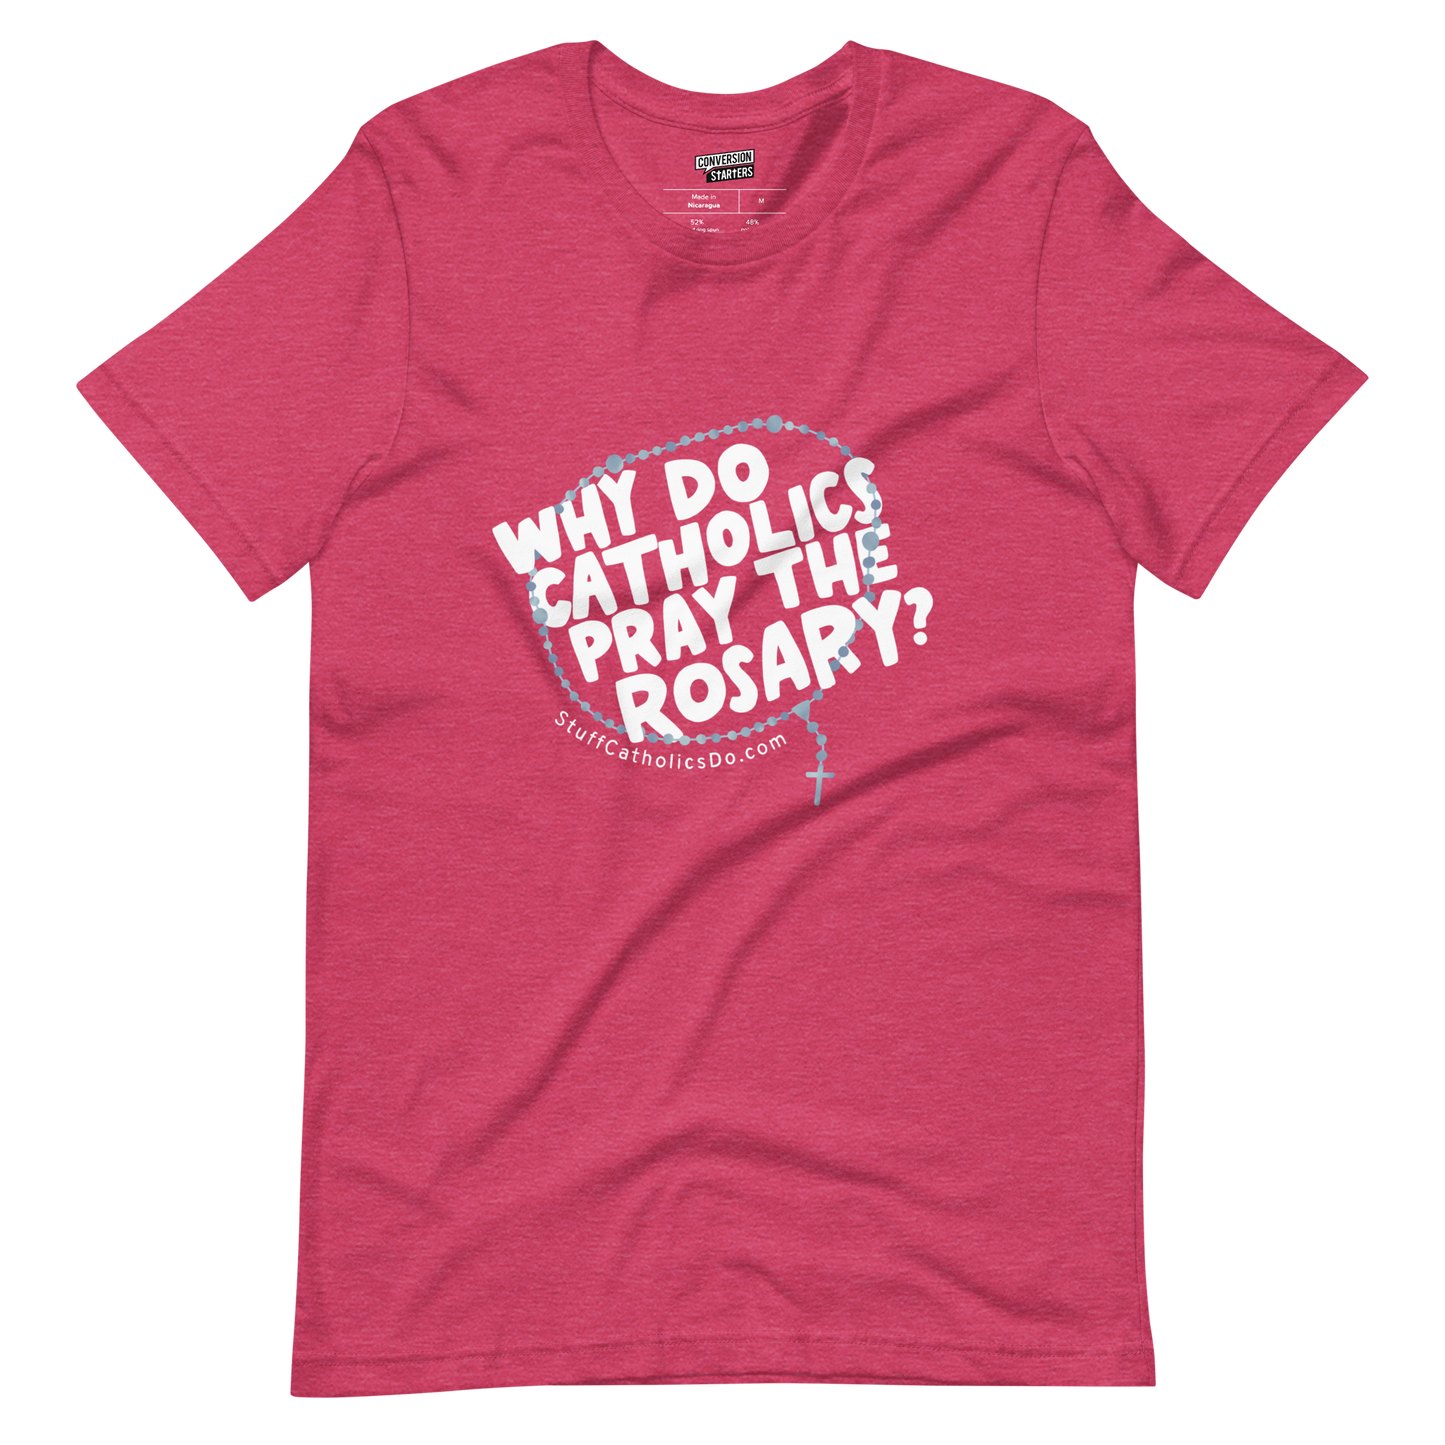 "Why Do Catholics Pray the Rosary?" T-shirt - Front and Back